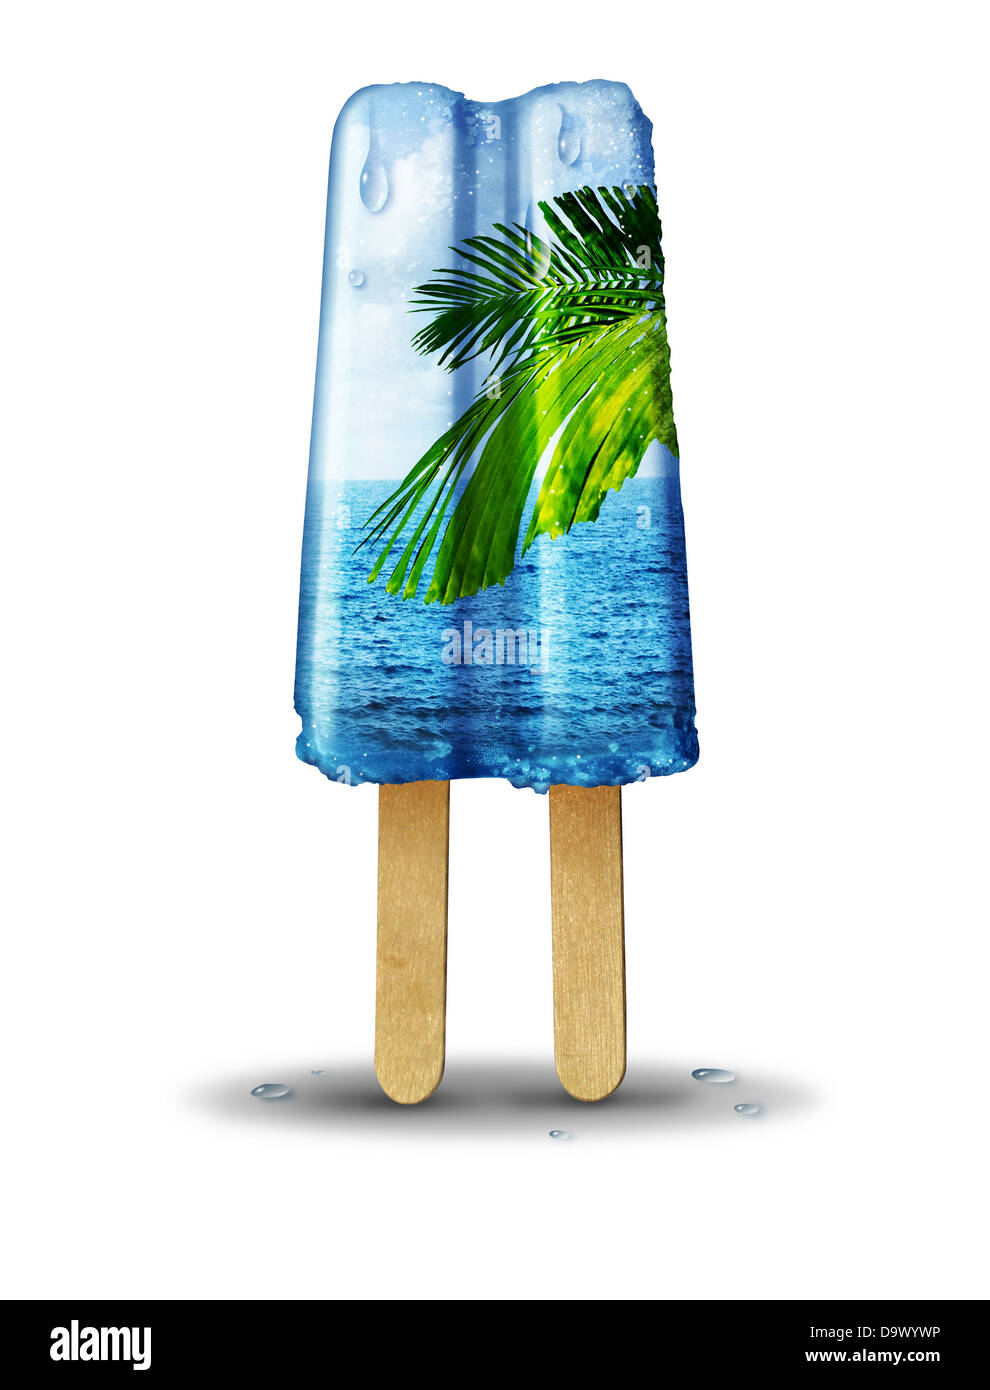 Cool Summer concept as a flavored frozen ice treat with a summertime tropical scene of ocean and palm tree in the cold refreshing dessert on a white background. Stock Photo